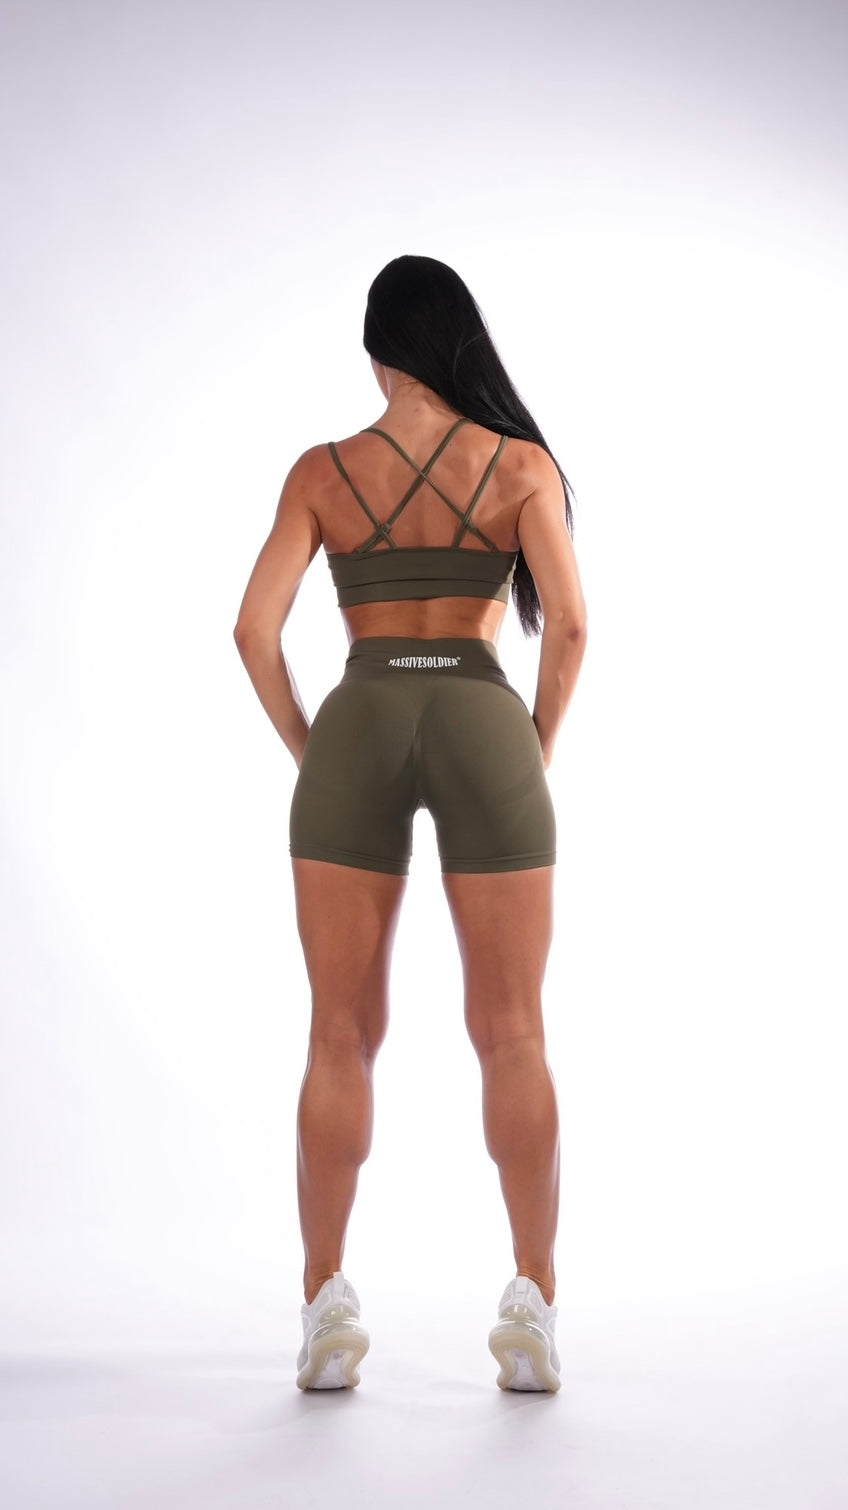 Solid olive scrunch shorts 